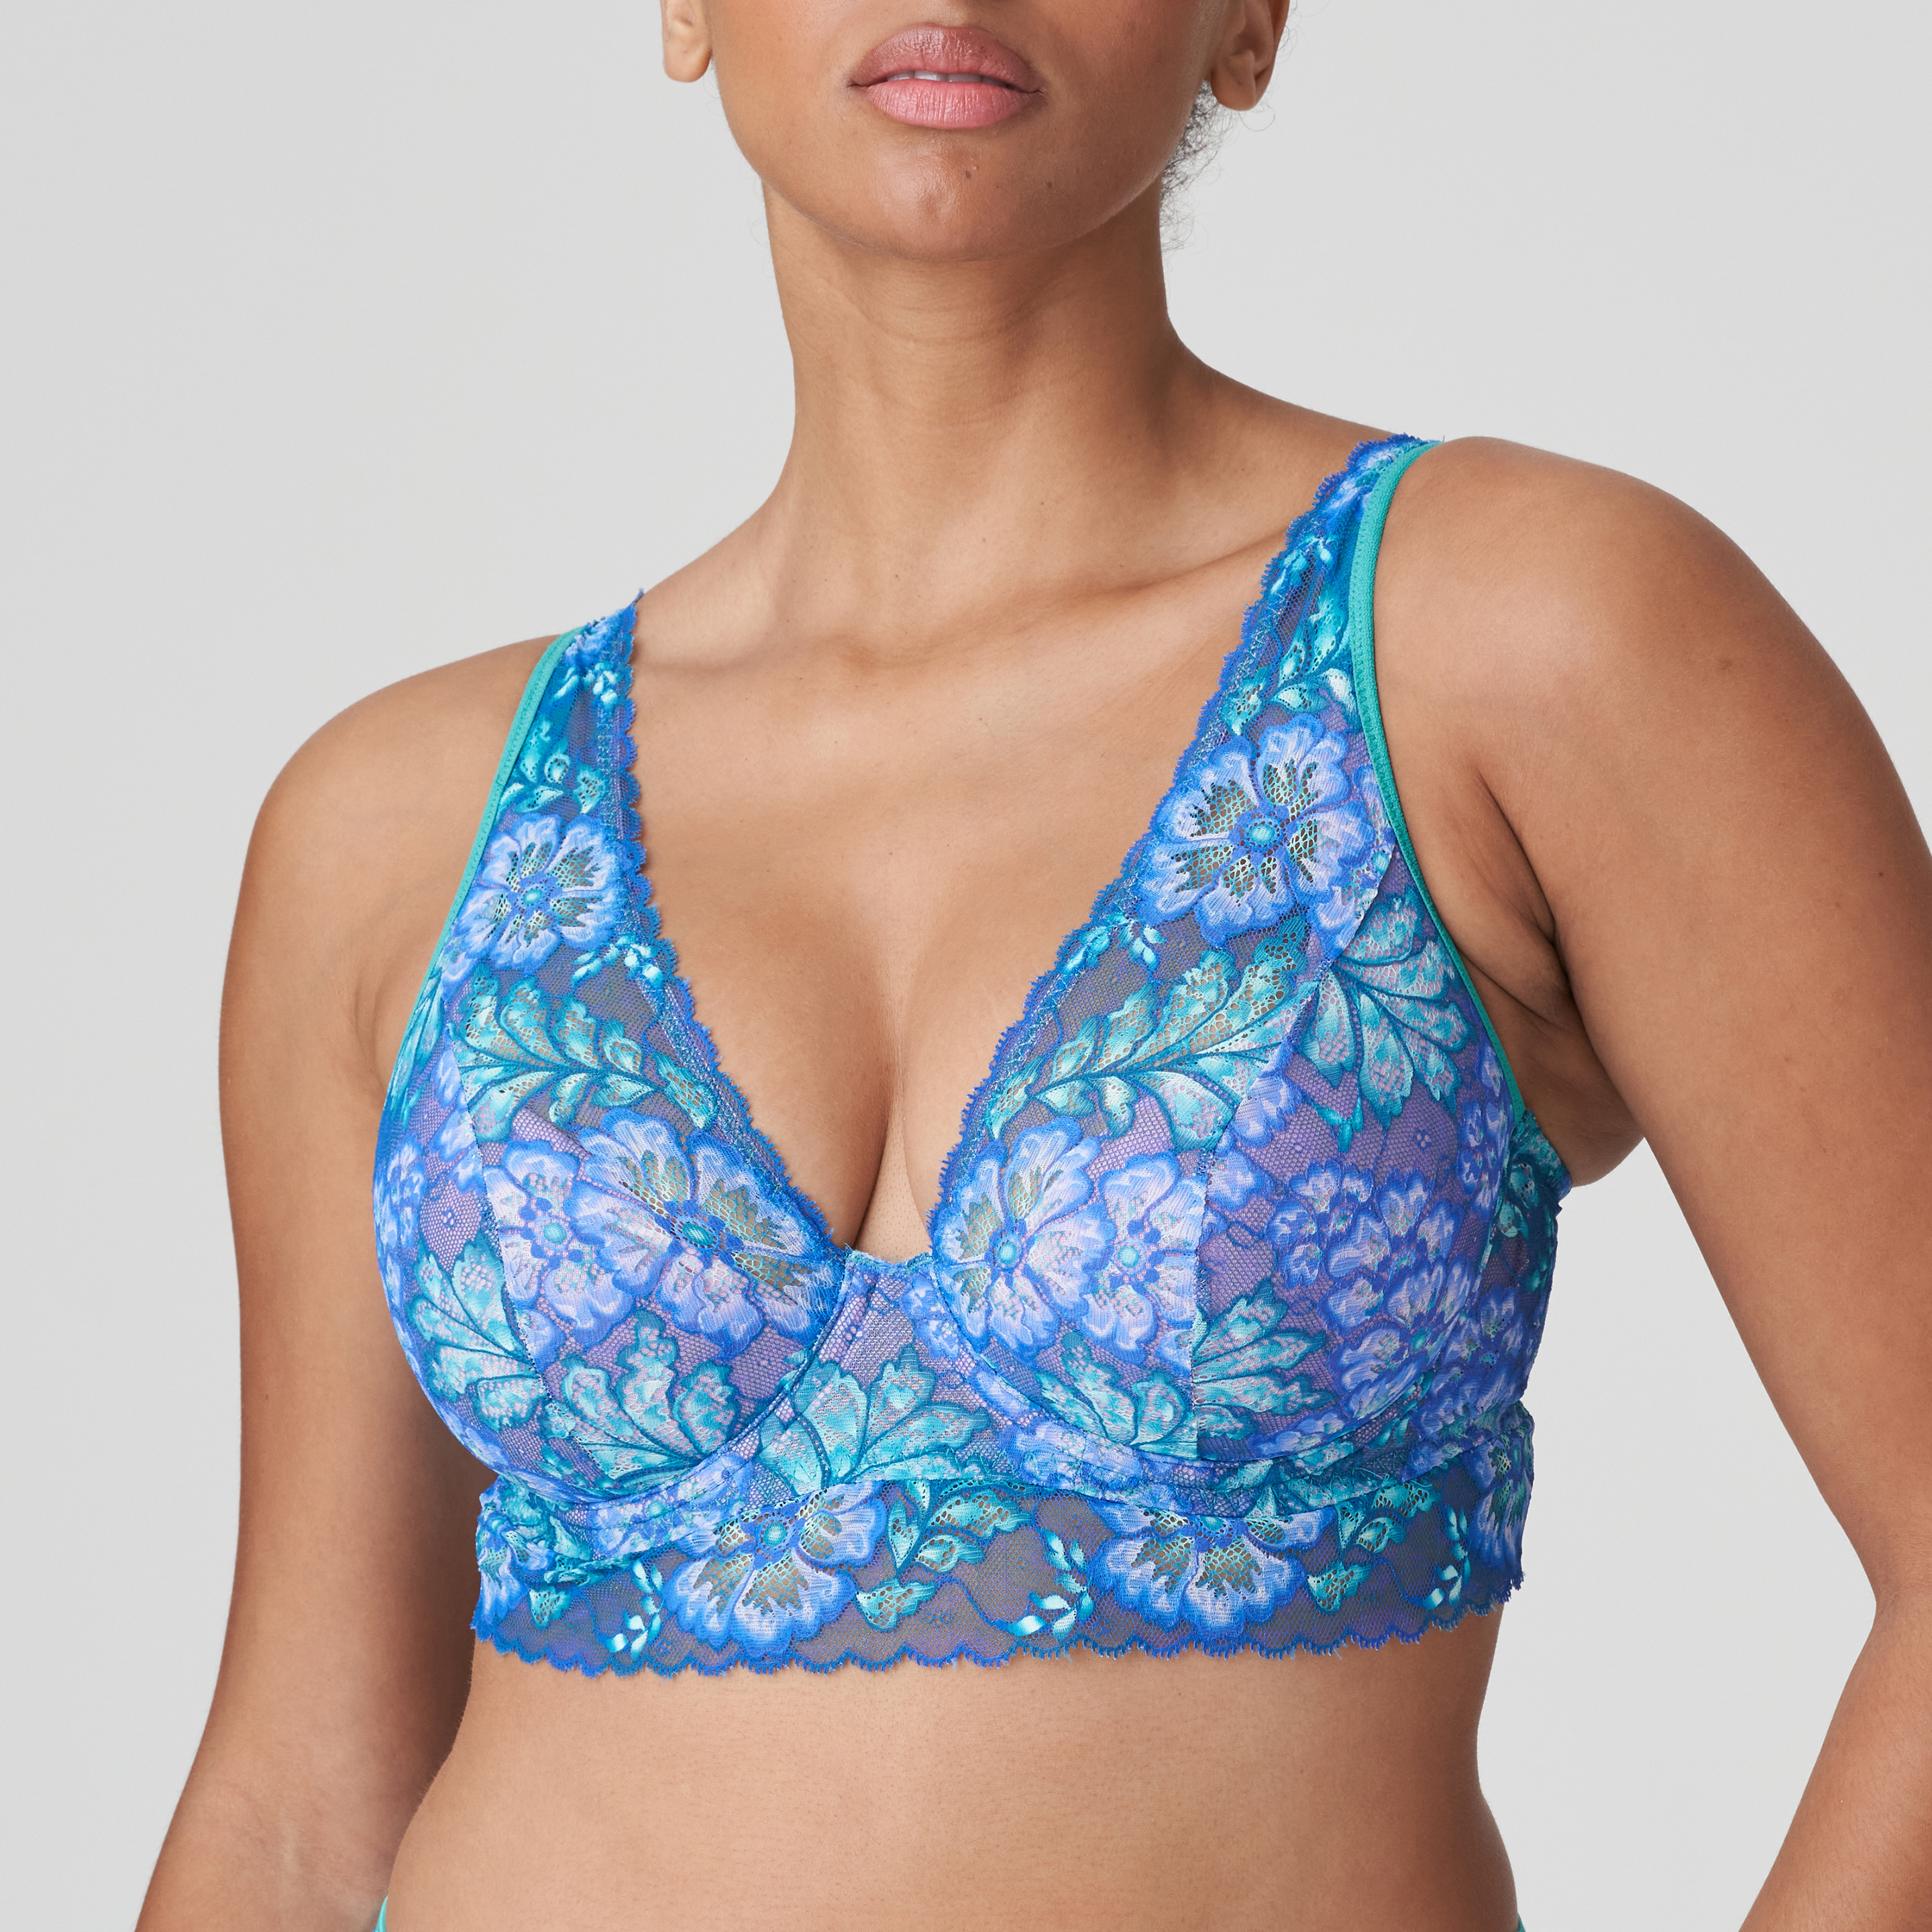 Sevilla Scroll Embroidery Semi Demi Bra - #14011 - Up to Size 46 - Lunaire:  Prettier Bras That Fit & Flatter Your Curves!